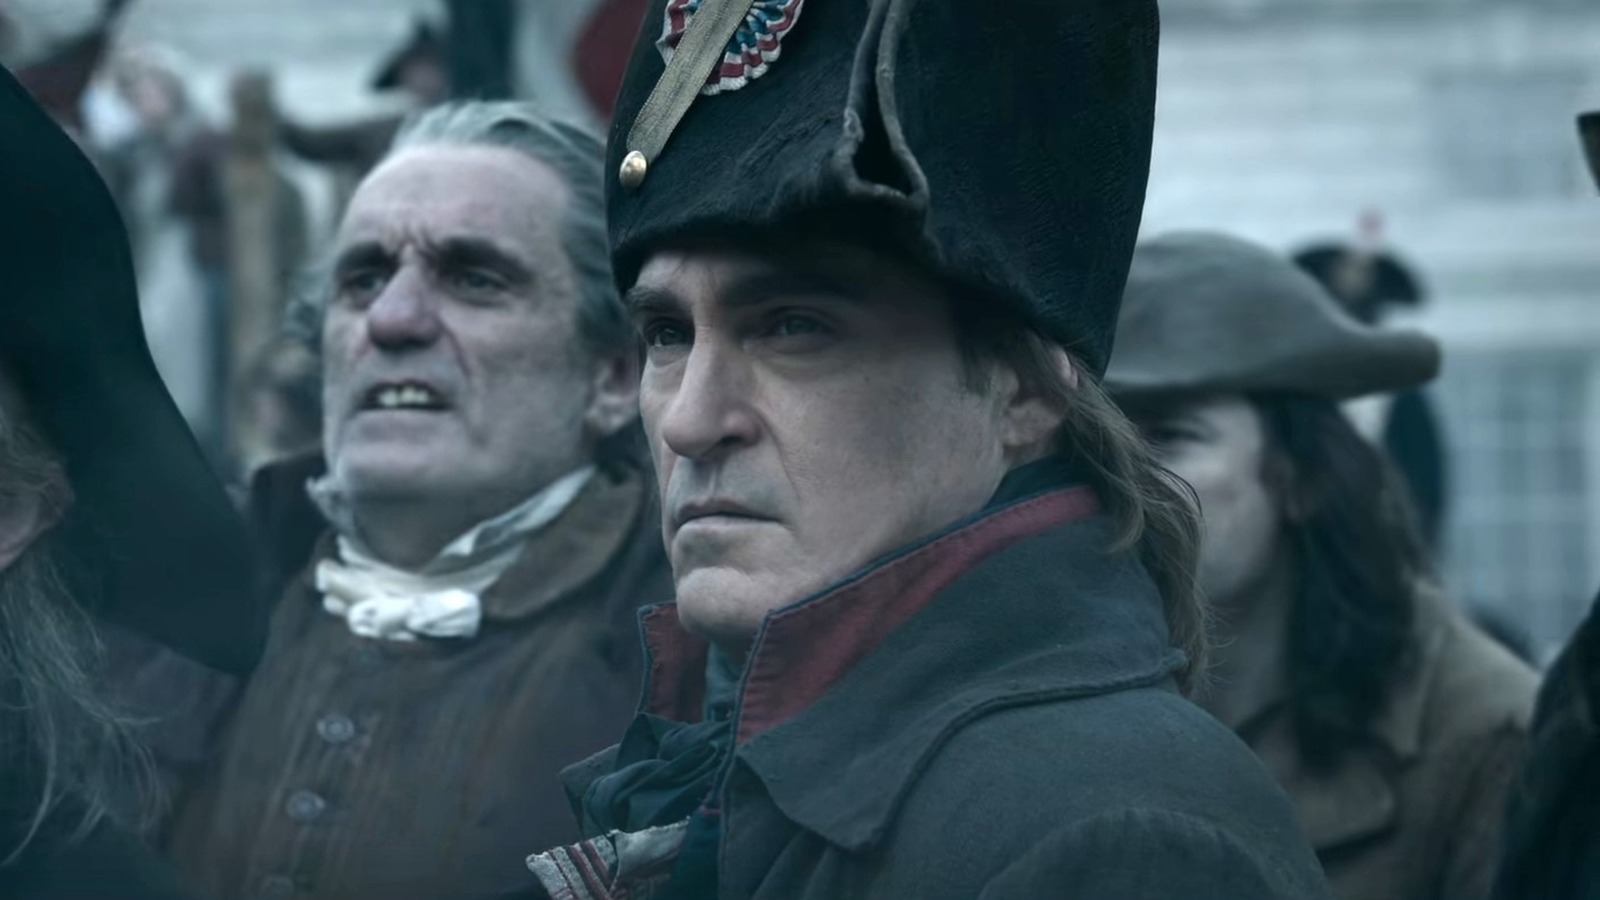 The Trailer for Ridley Scott's 'Napoleon' Is Here